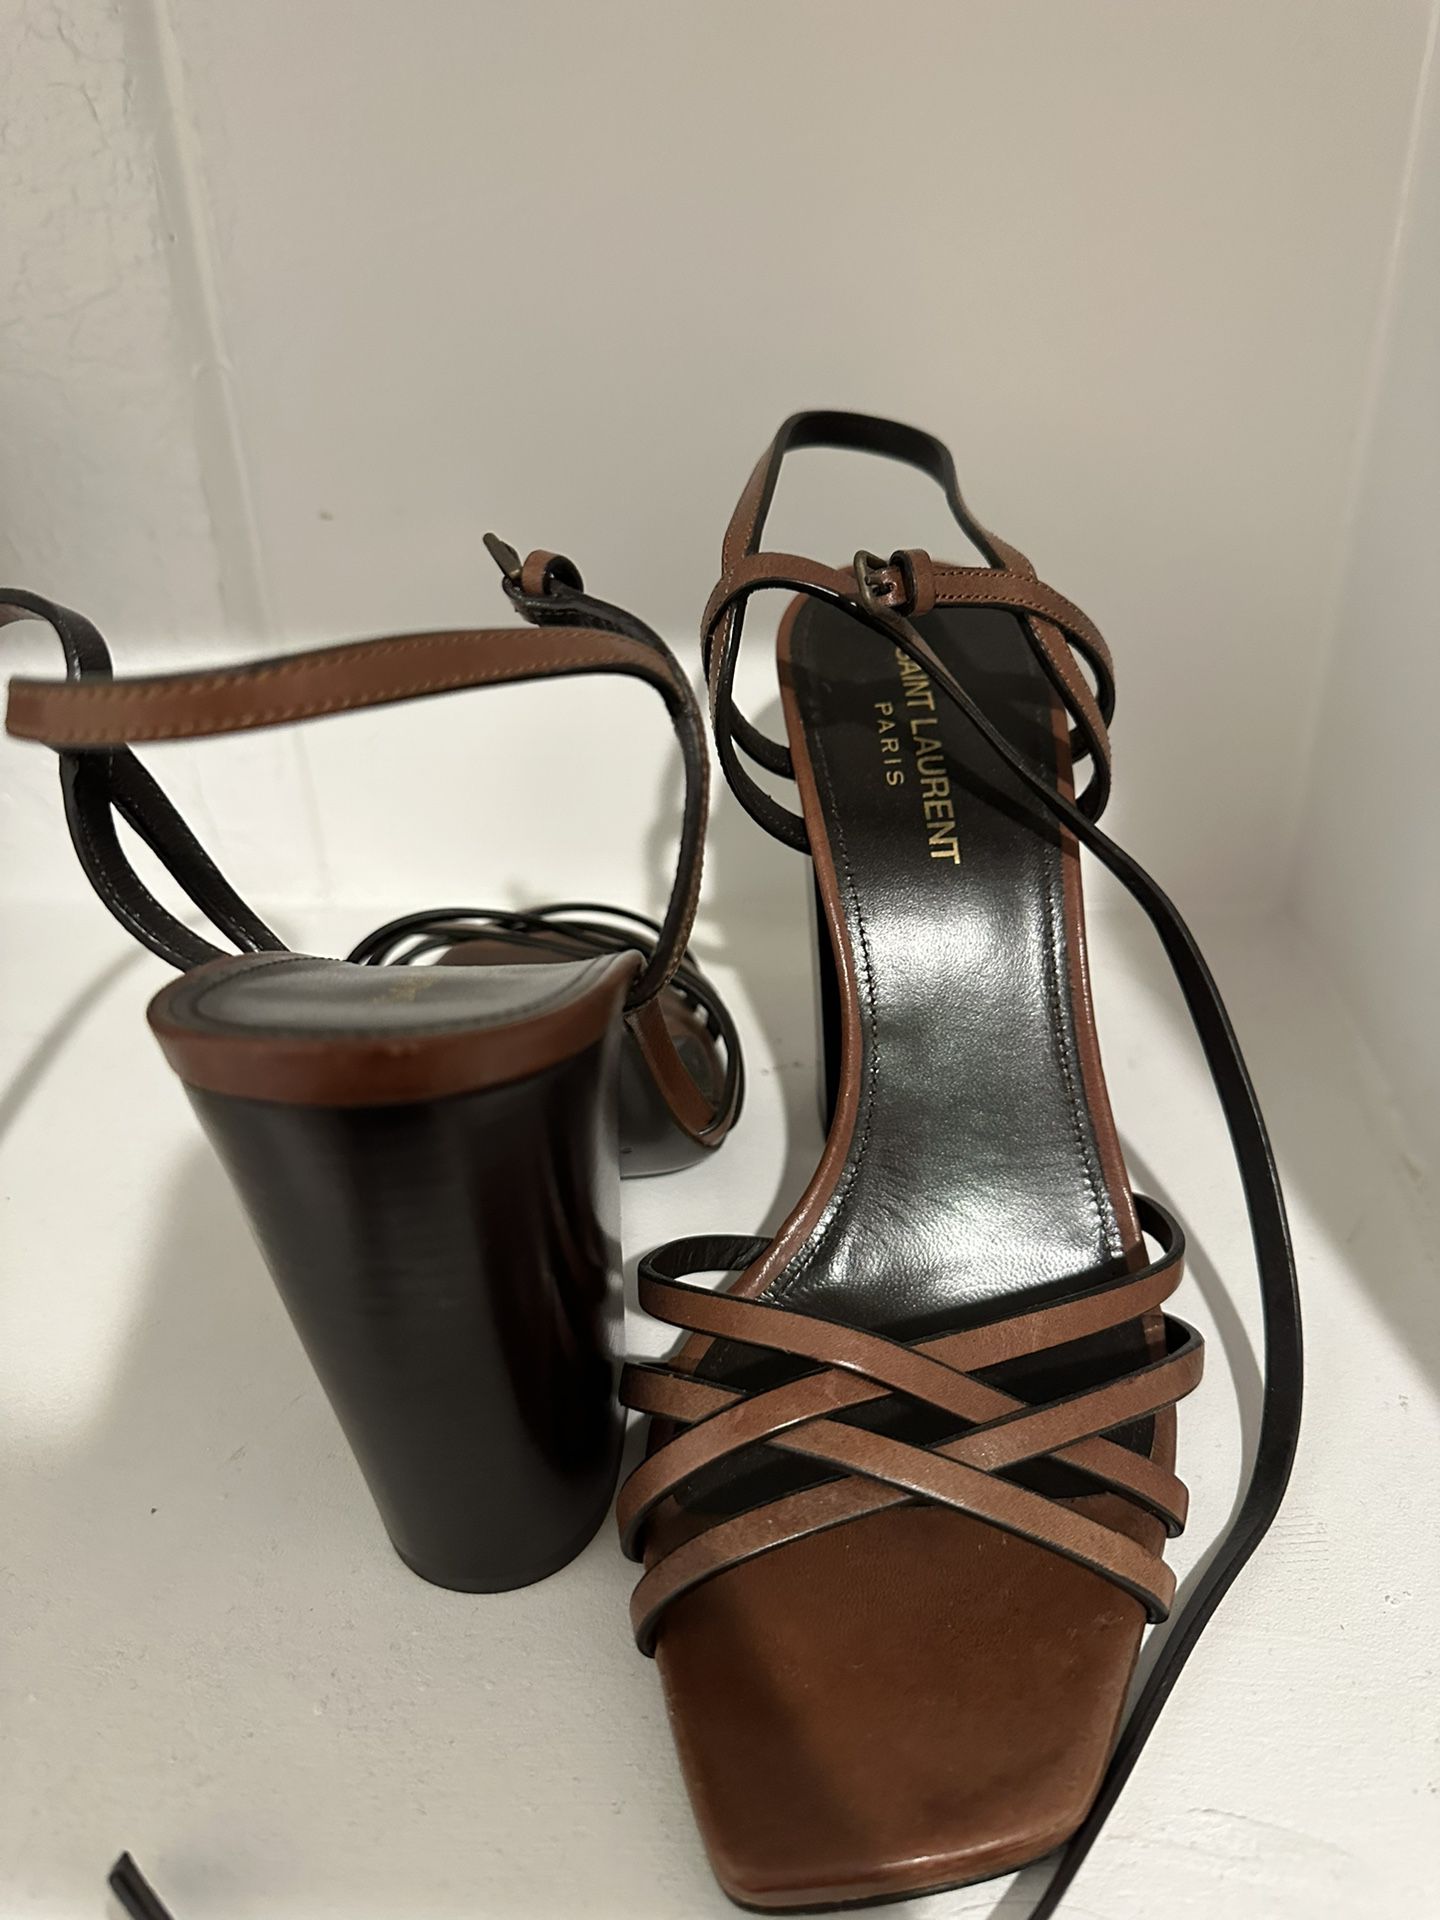 Saint Laurent - Authenticated Heel - Cloth Brown for Women, Very Good Condition